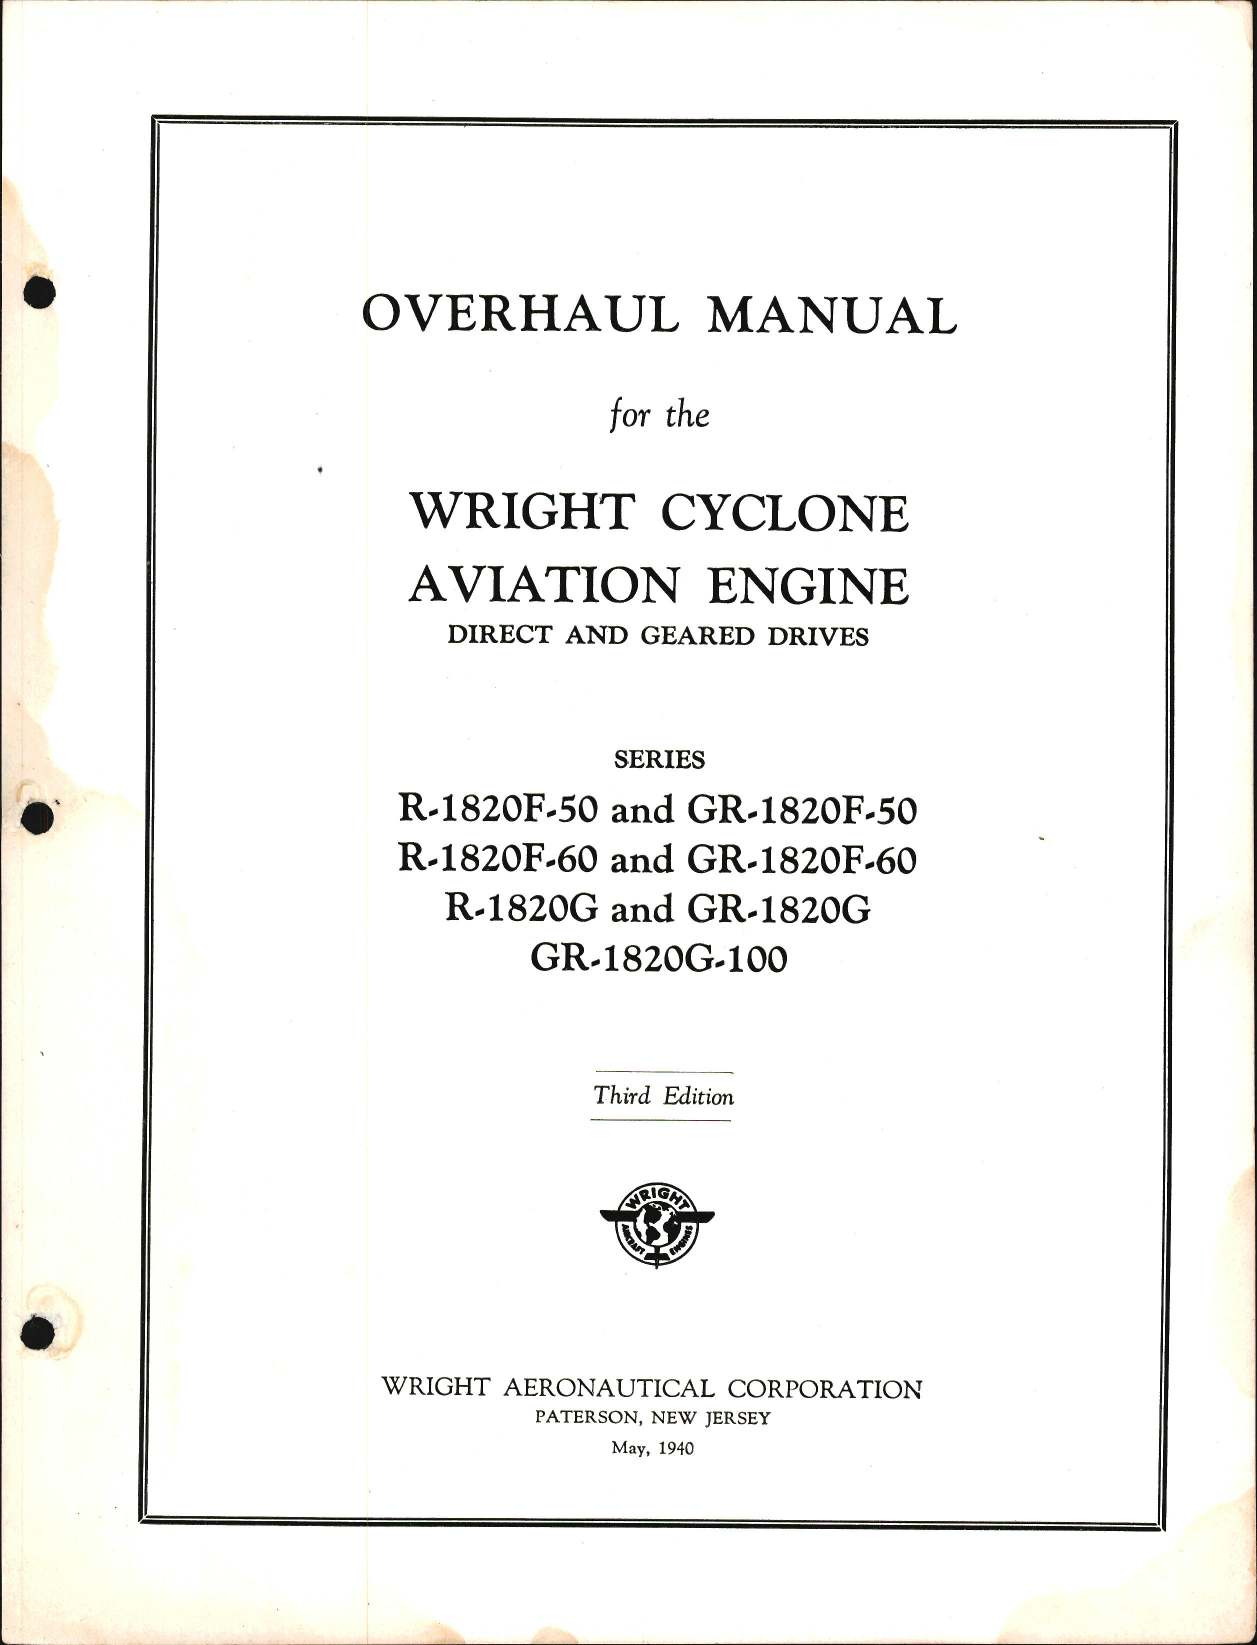 Sample page 1 from AirCorps Library document: Overhaul Manual for Wright Cyclone Engines - Direct and Geared Drives